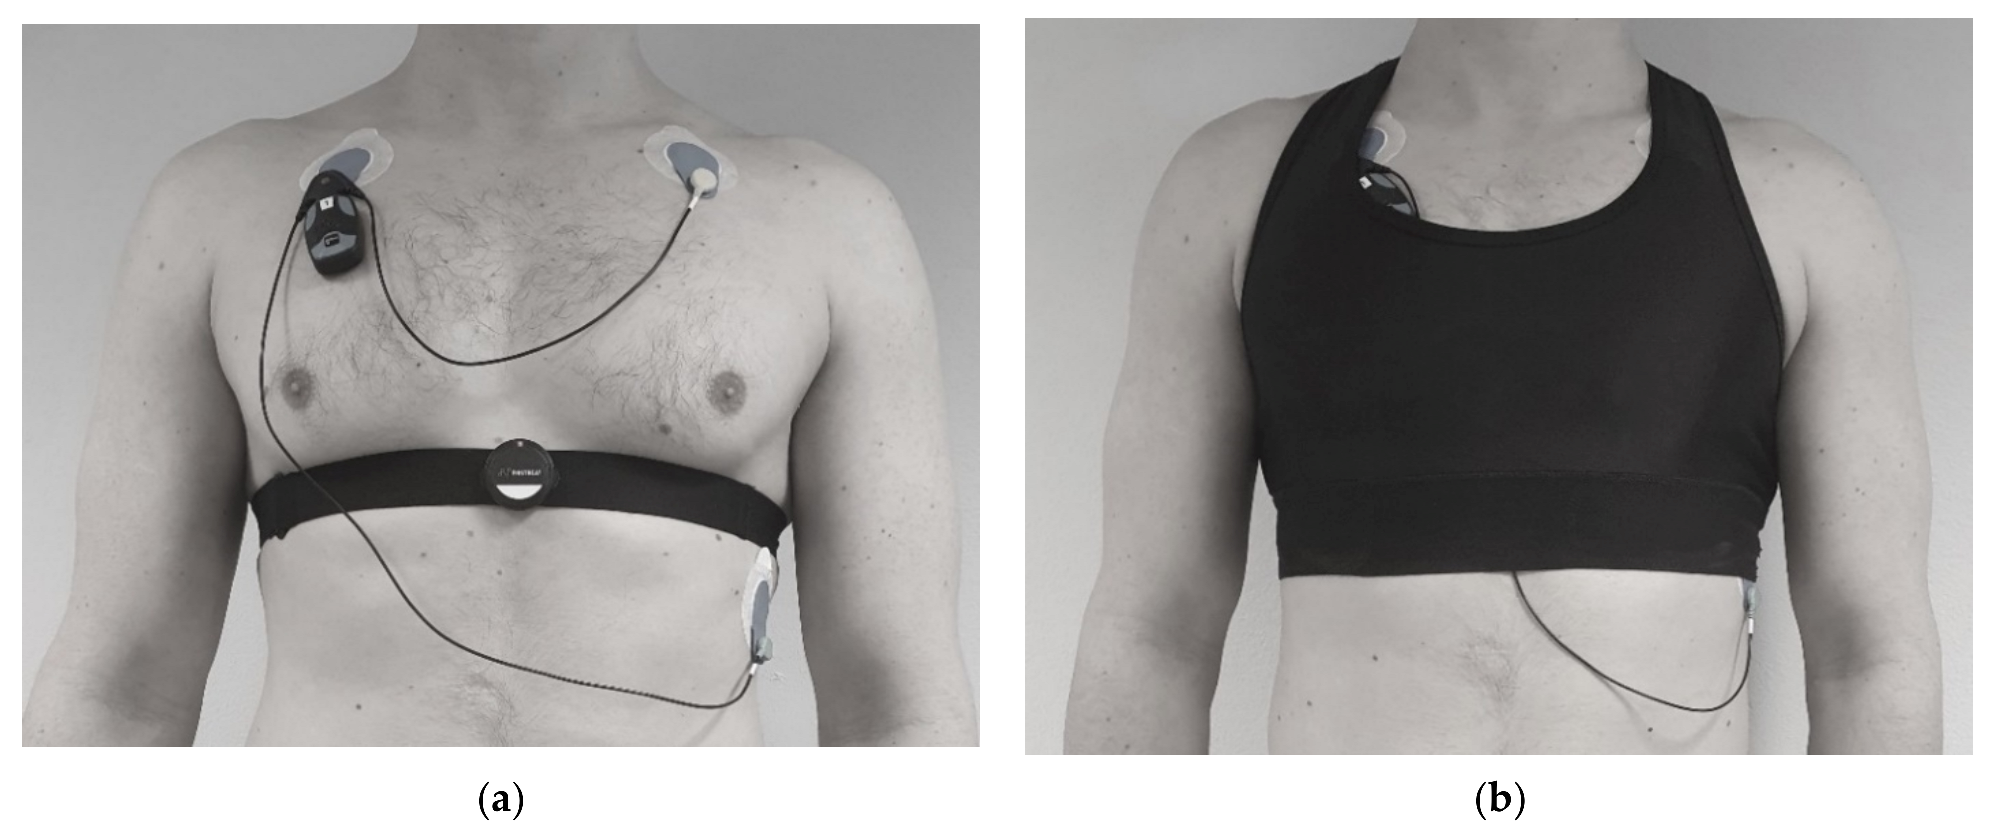 Sensors | Free Full-Text | Comparison of Heart Rate Monitoring Accuracy  between Chest Strap and Vest during Physical Training and Implications on  Training Decisions